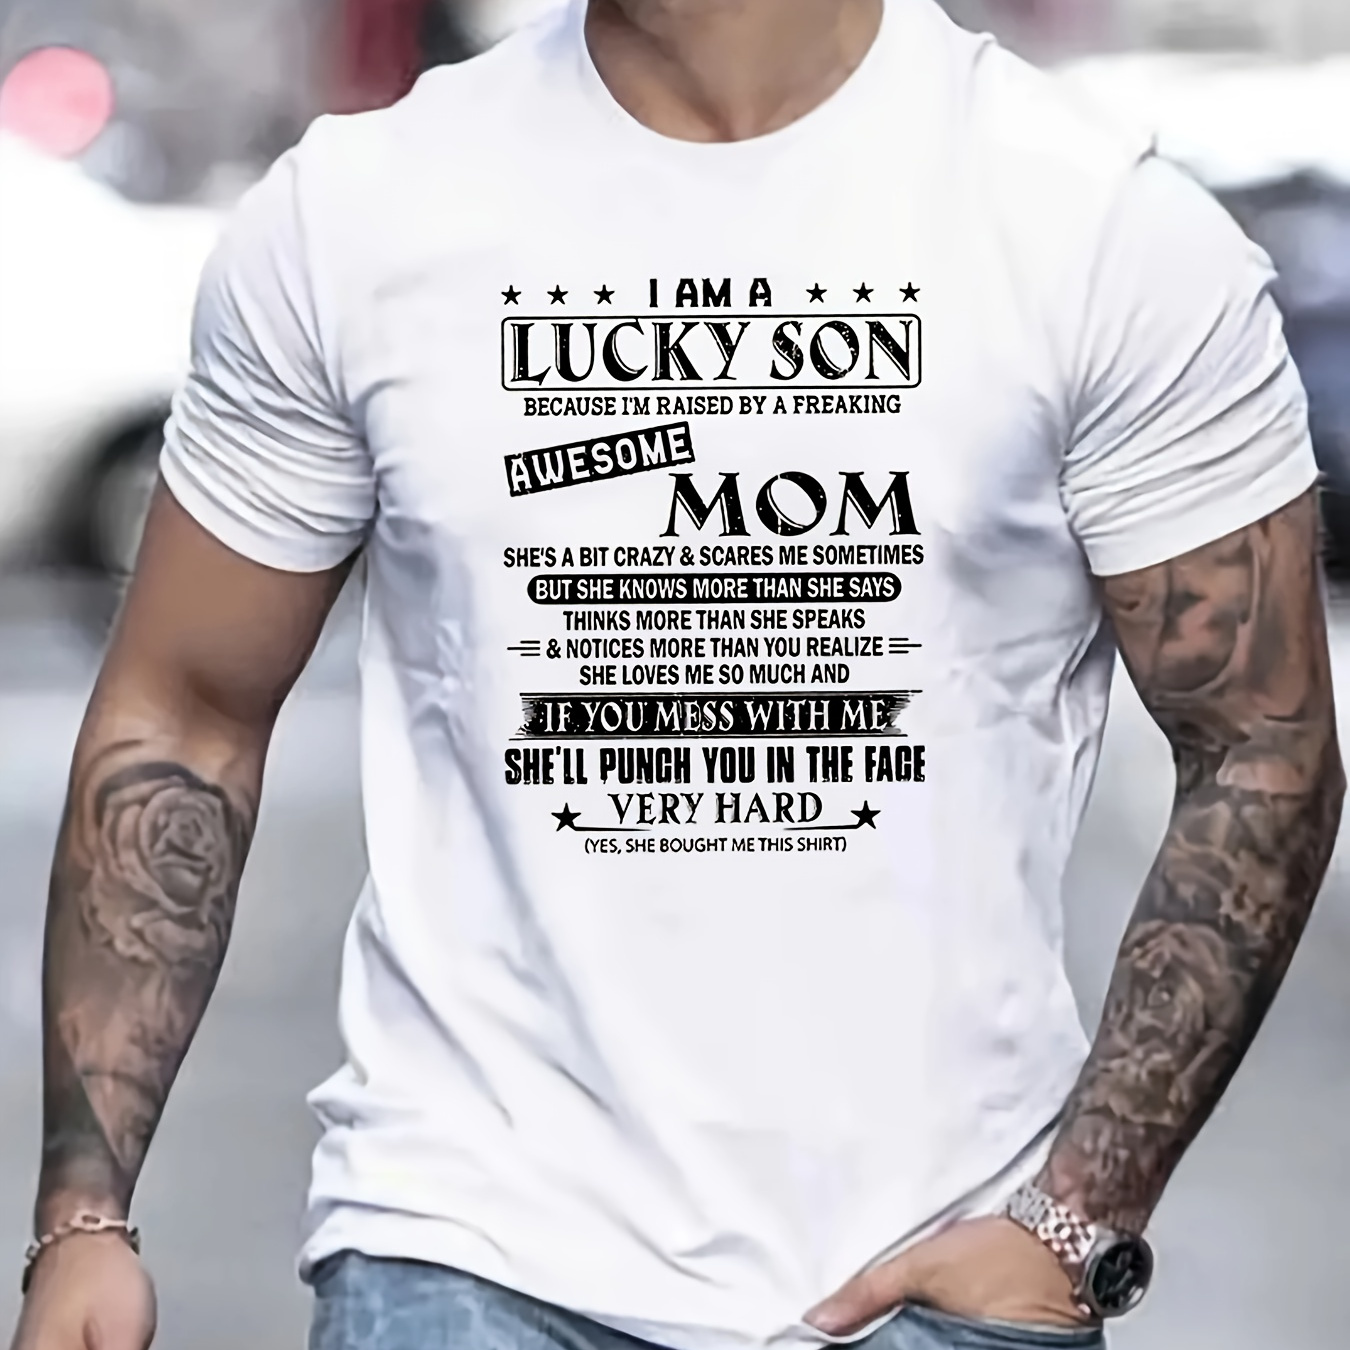 

Raised By An Awesome Mom Print T Shirt, Tees For Men, Casual Short Sleeve T-shirt For Summer